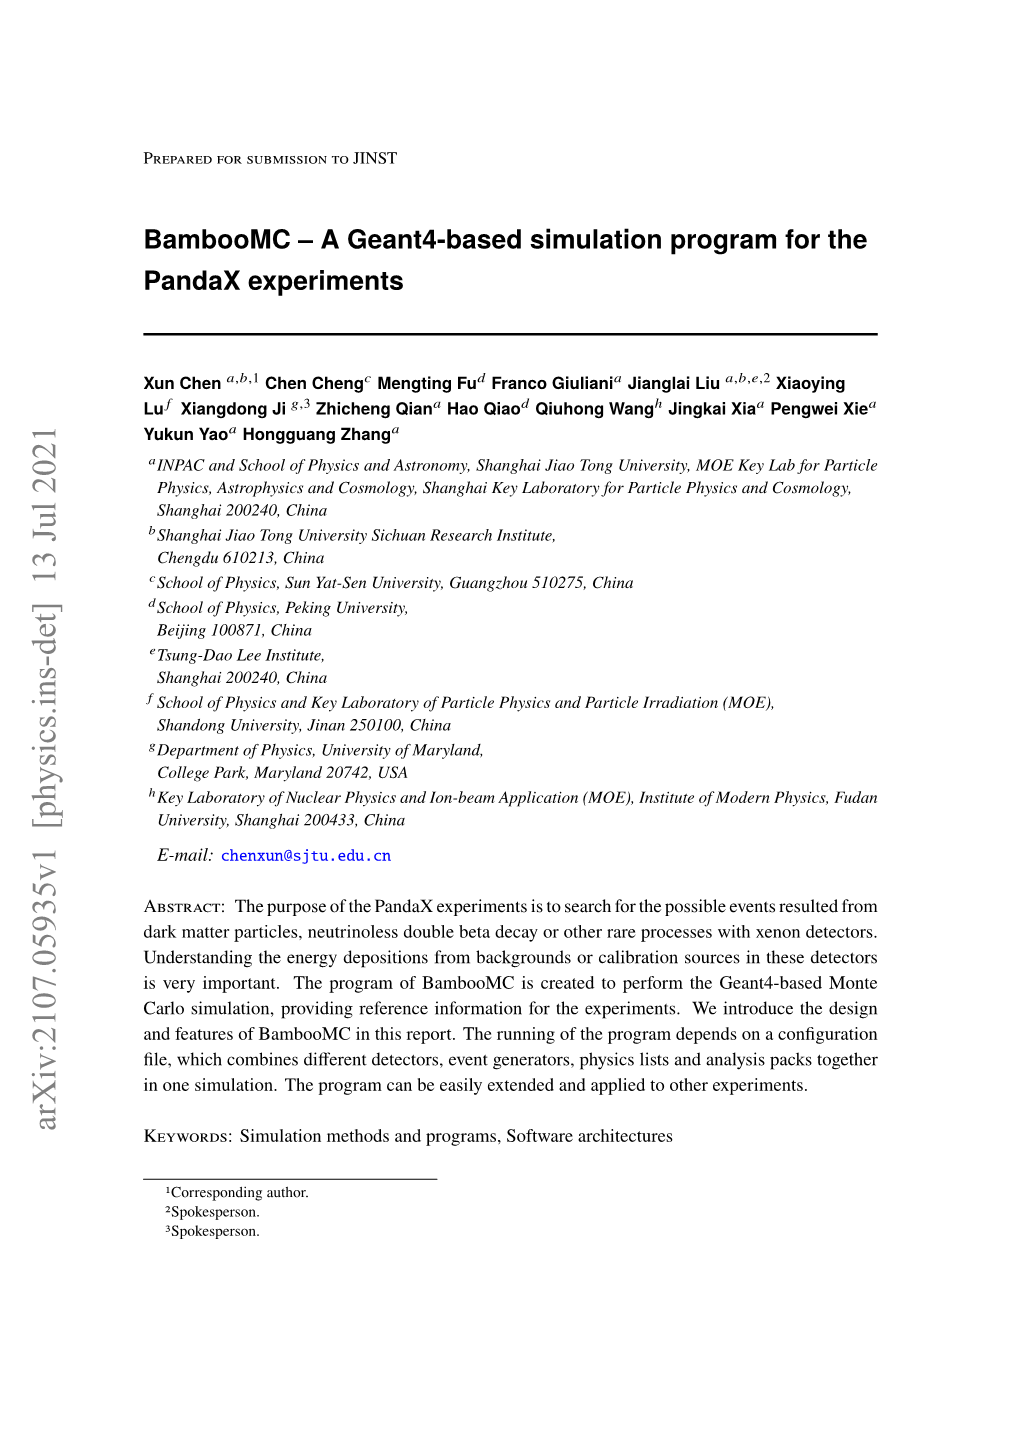 Bamboomc--A Geant4-Based Simulation Program for the Pandax Experiments